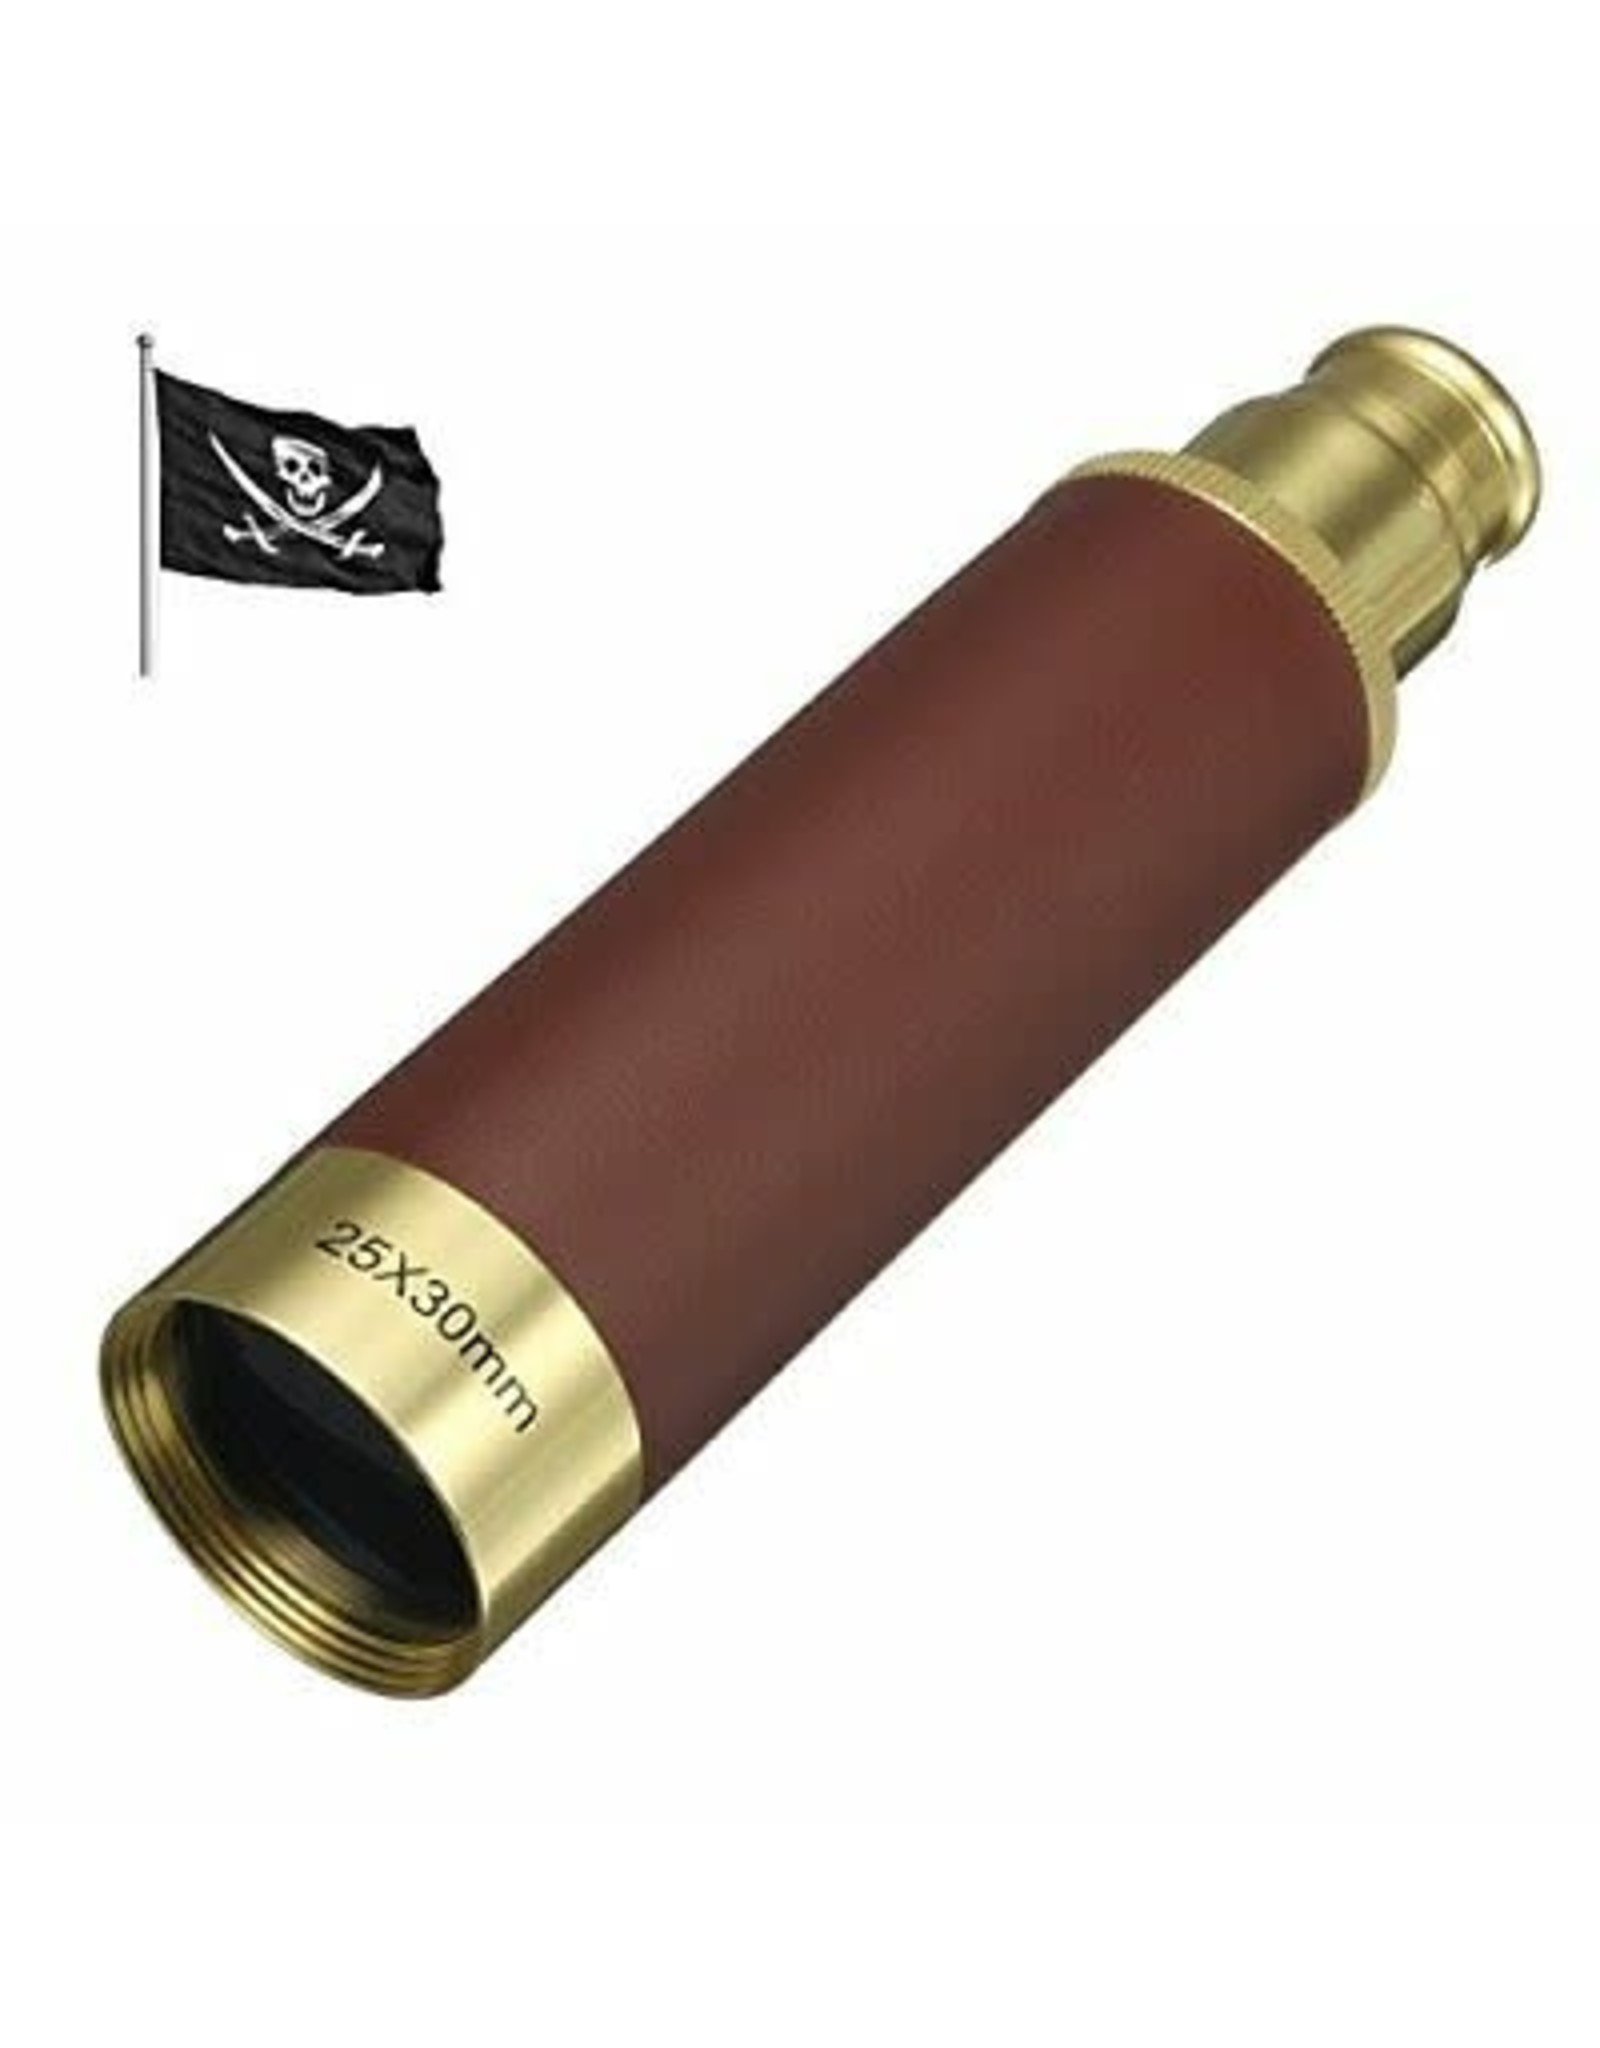 25x30 Zoomable Spyglass Pirate Brass Telescope Collapsible Handheld